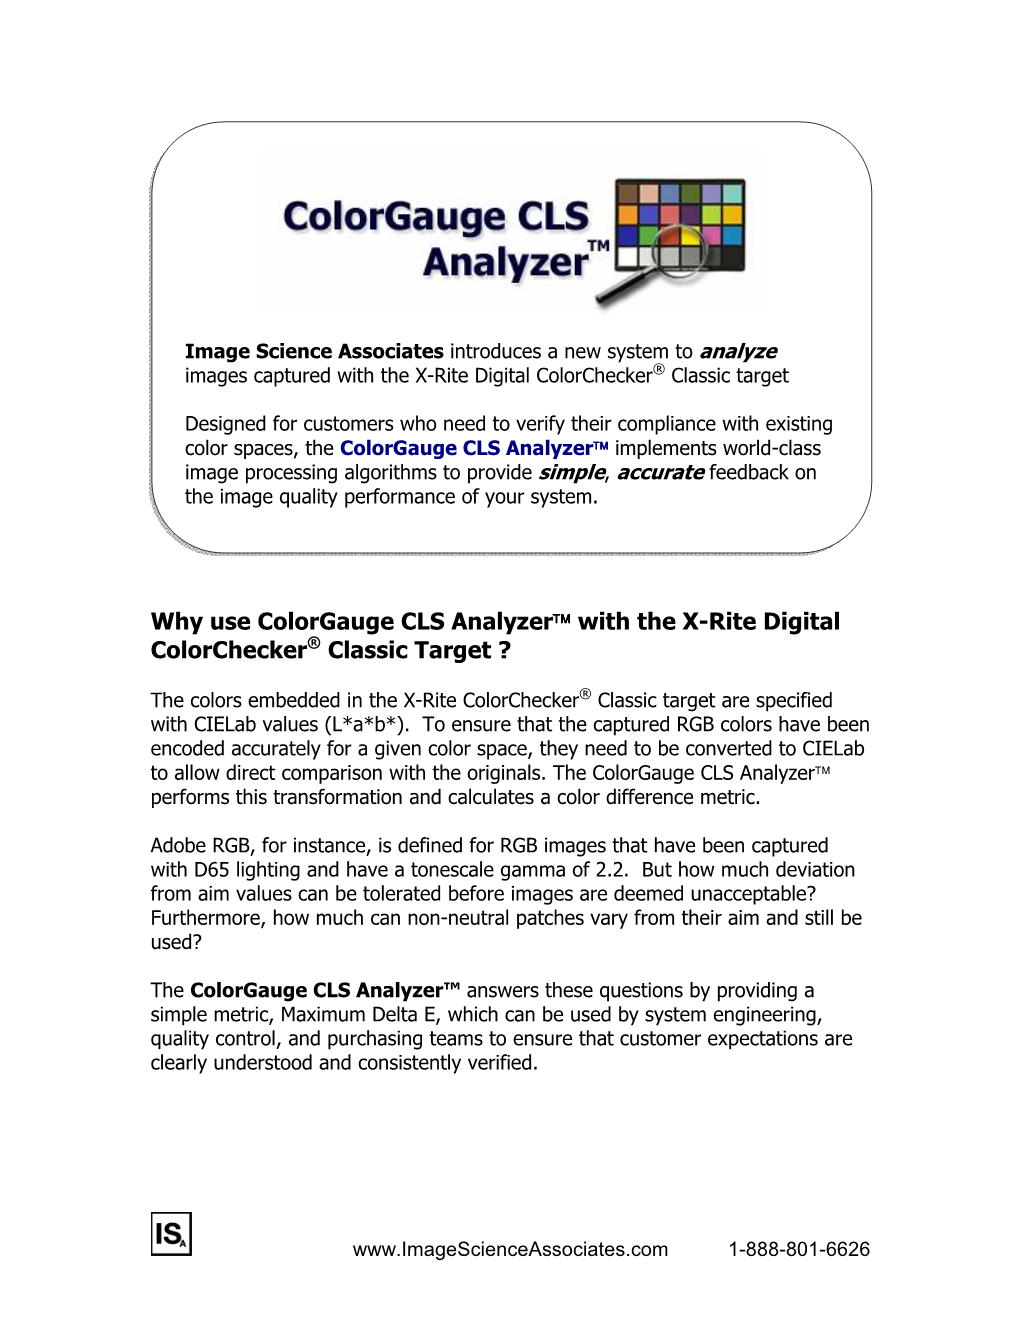 Why Use Colorgauge CLS Analyzer™ with the X-Rite Digital